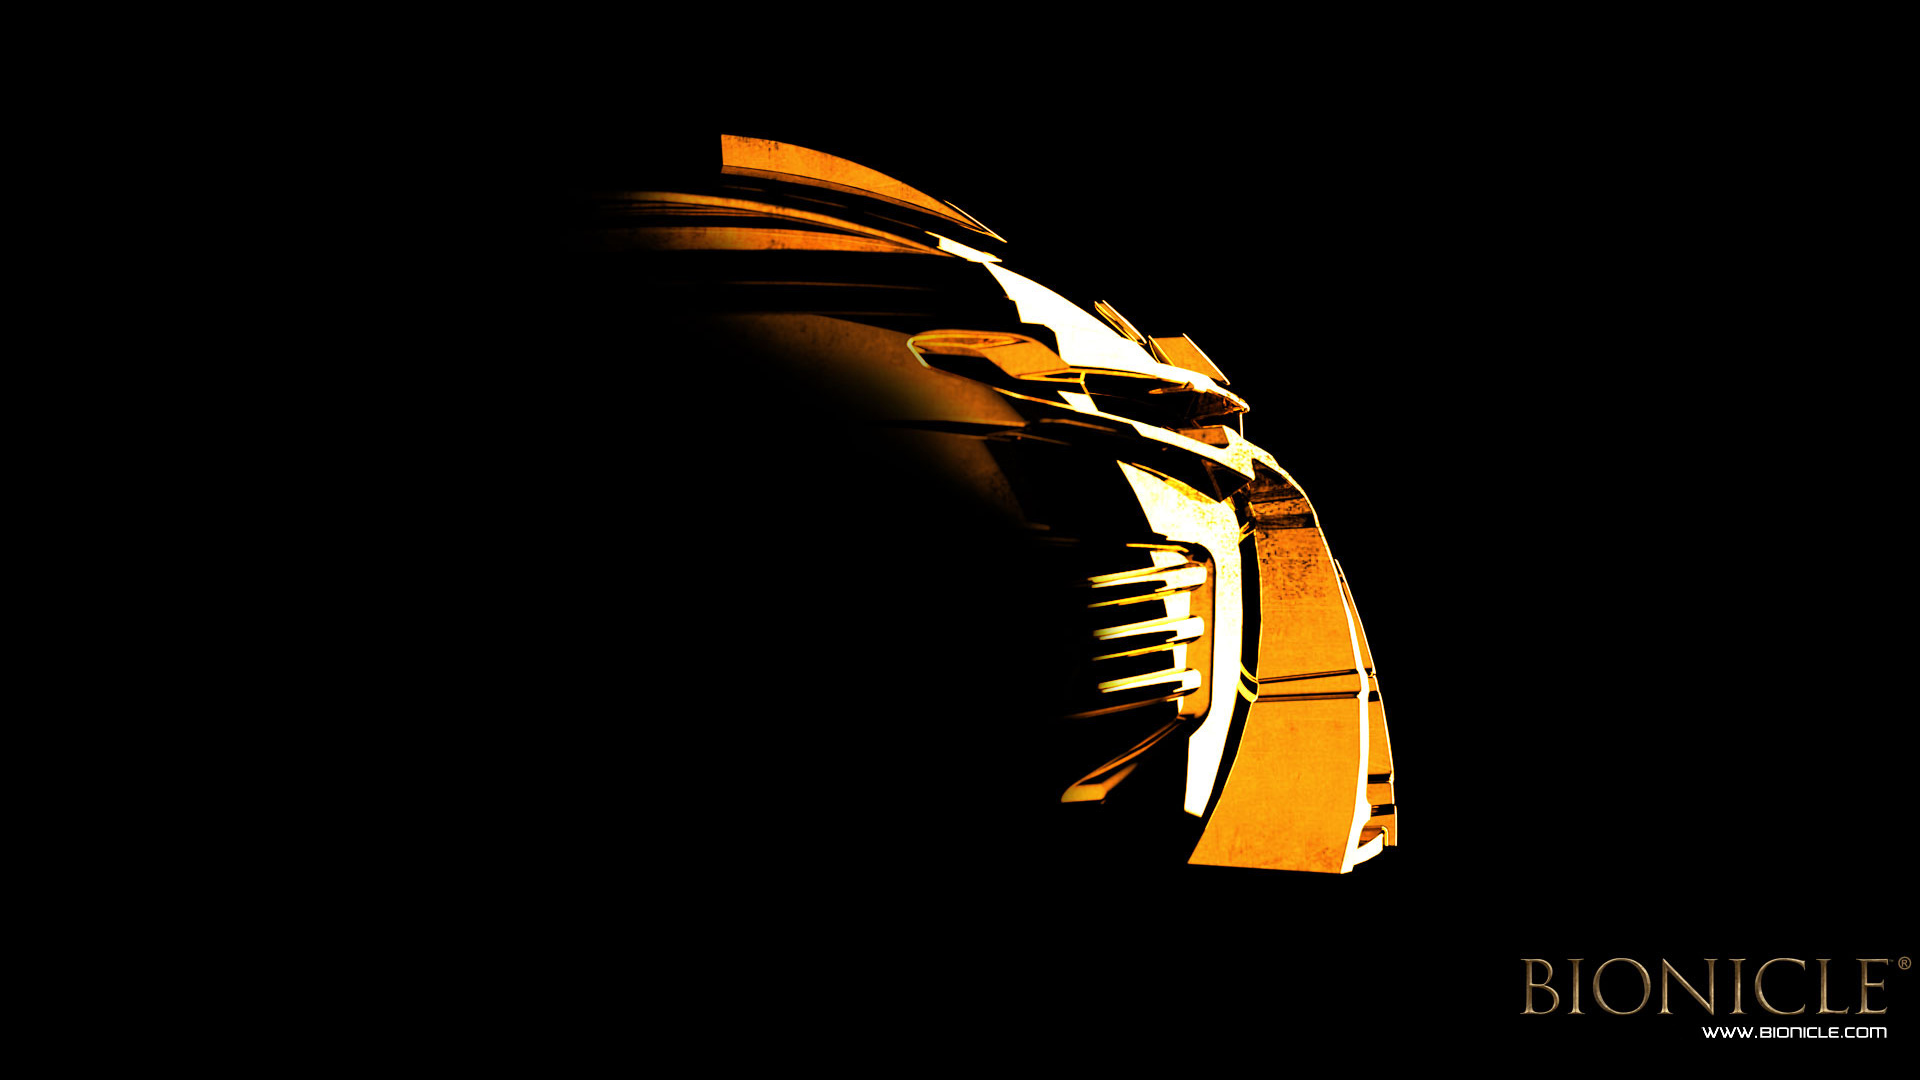 General 1920x1080 Bionicle  mask simple background black background